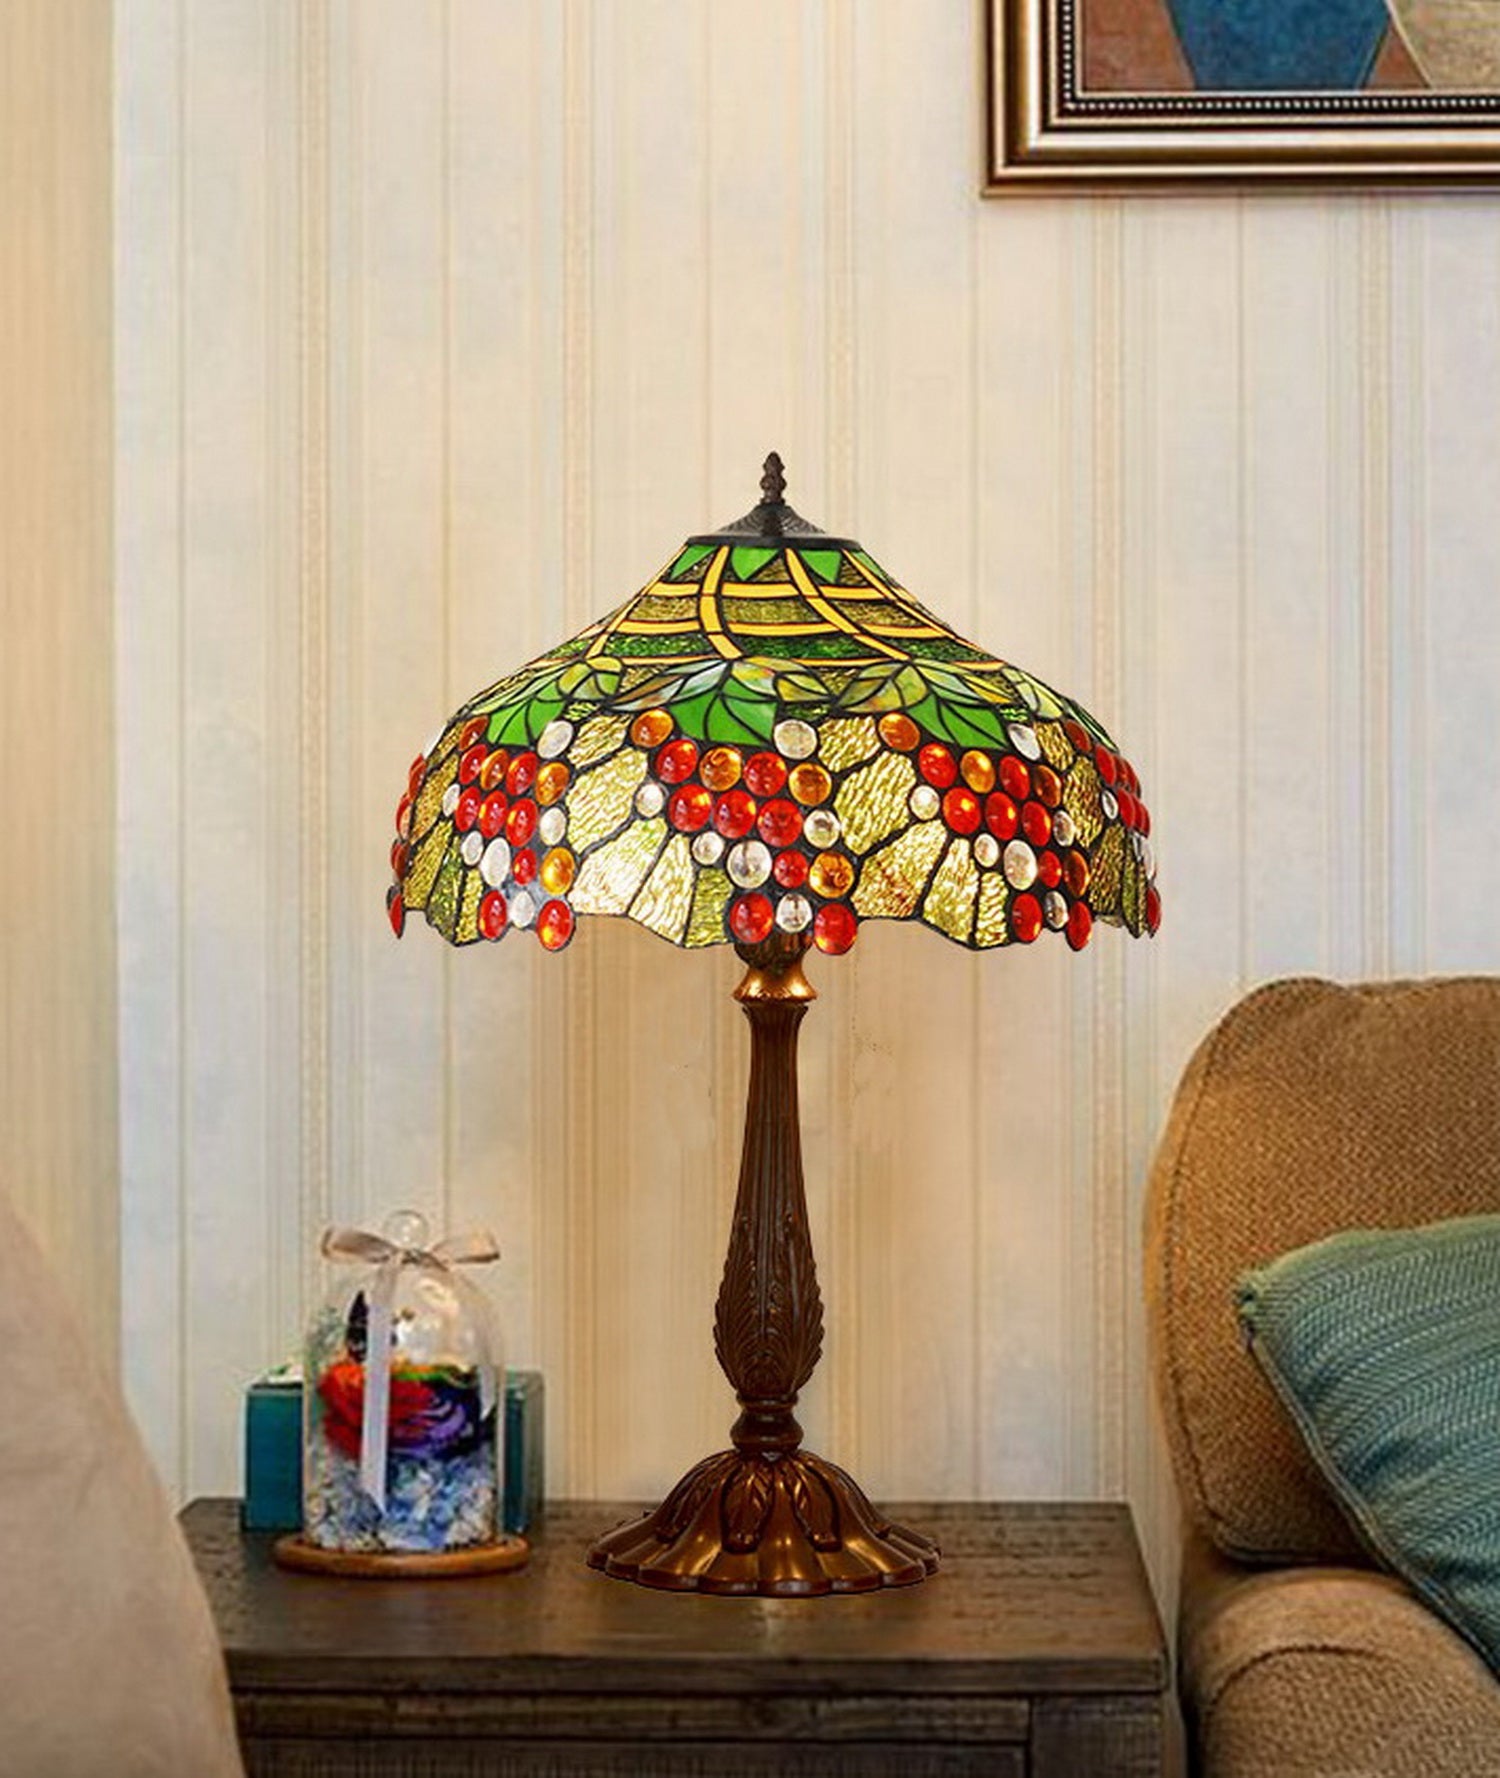 Limited Edition Fabulous 18" Grape Style Tiffany Table Lamp